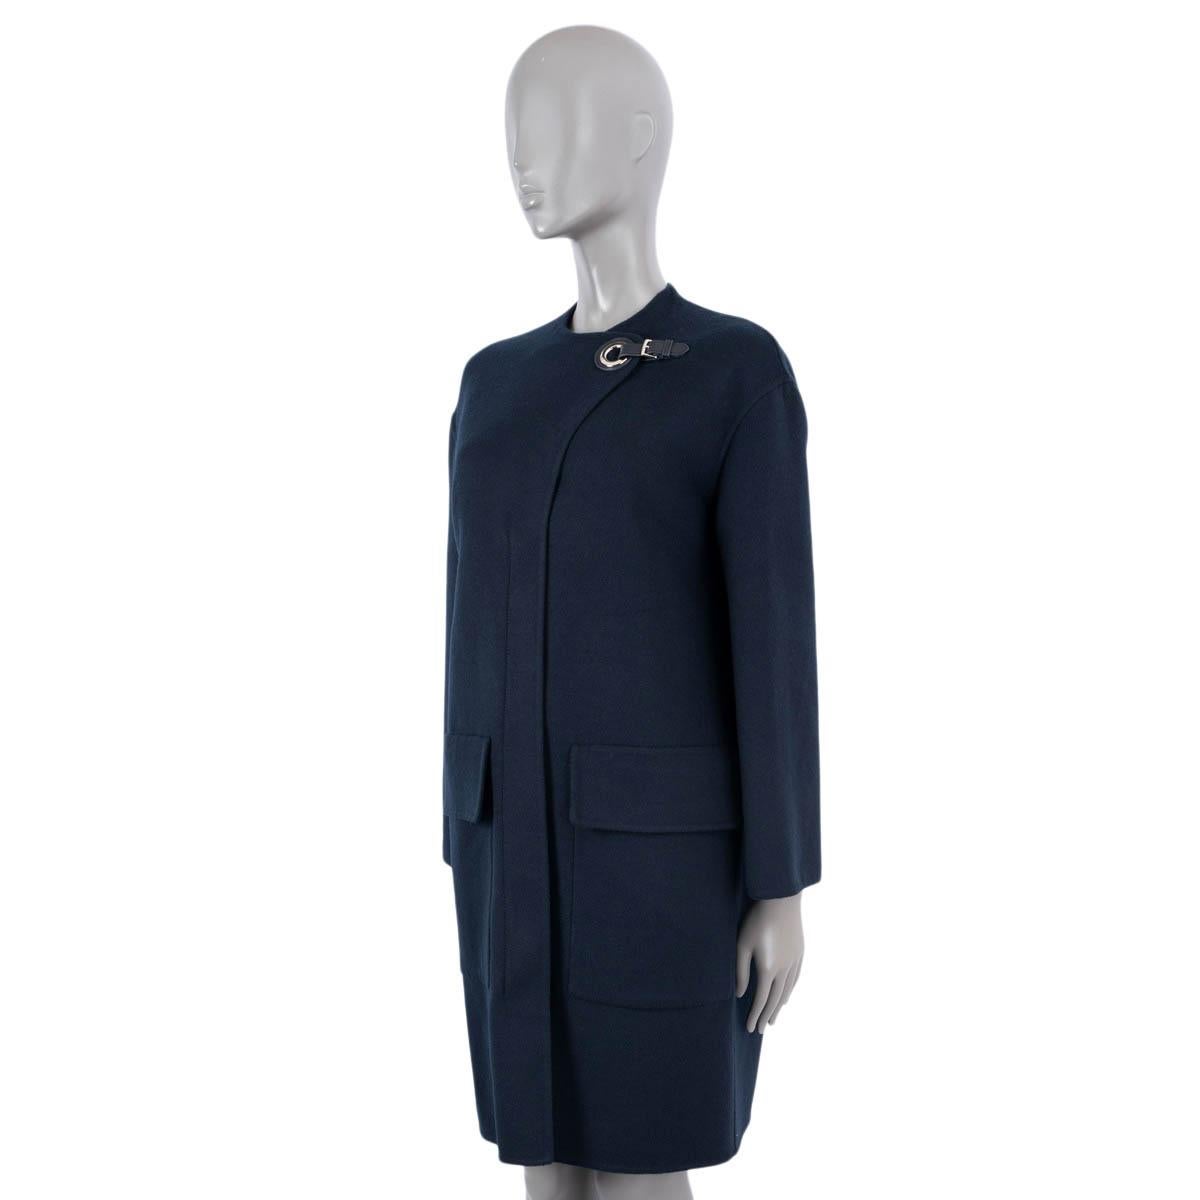 HERMES navy blue cashmere 2022 ZIP-FRONT Coat Jacket w EYELET CLOSURE 36 XS In Excellent Condition For Sale In Zürich, CH